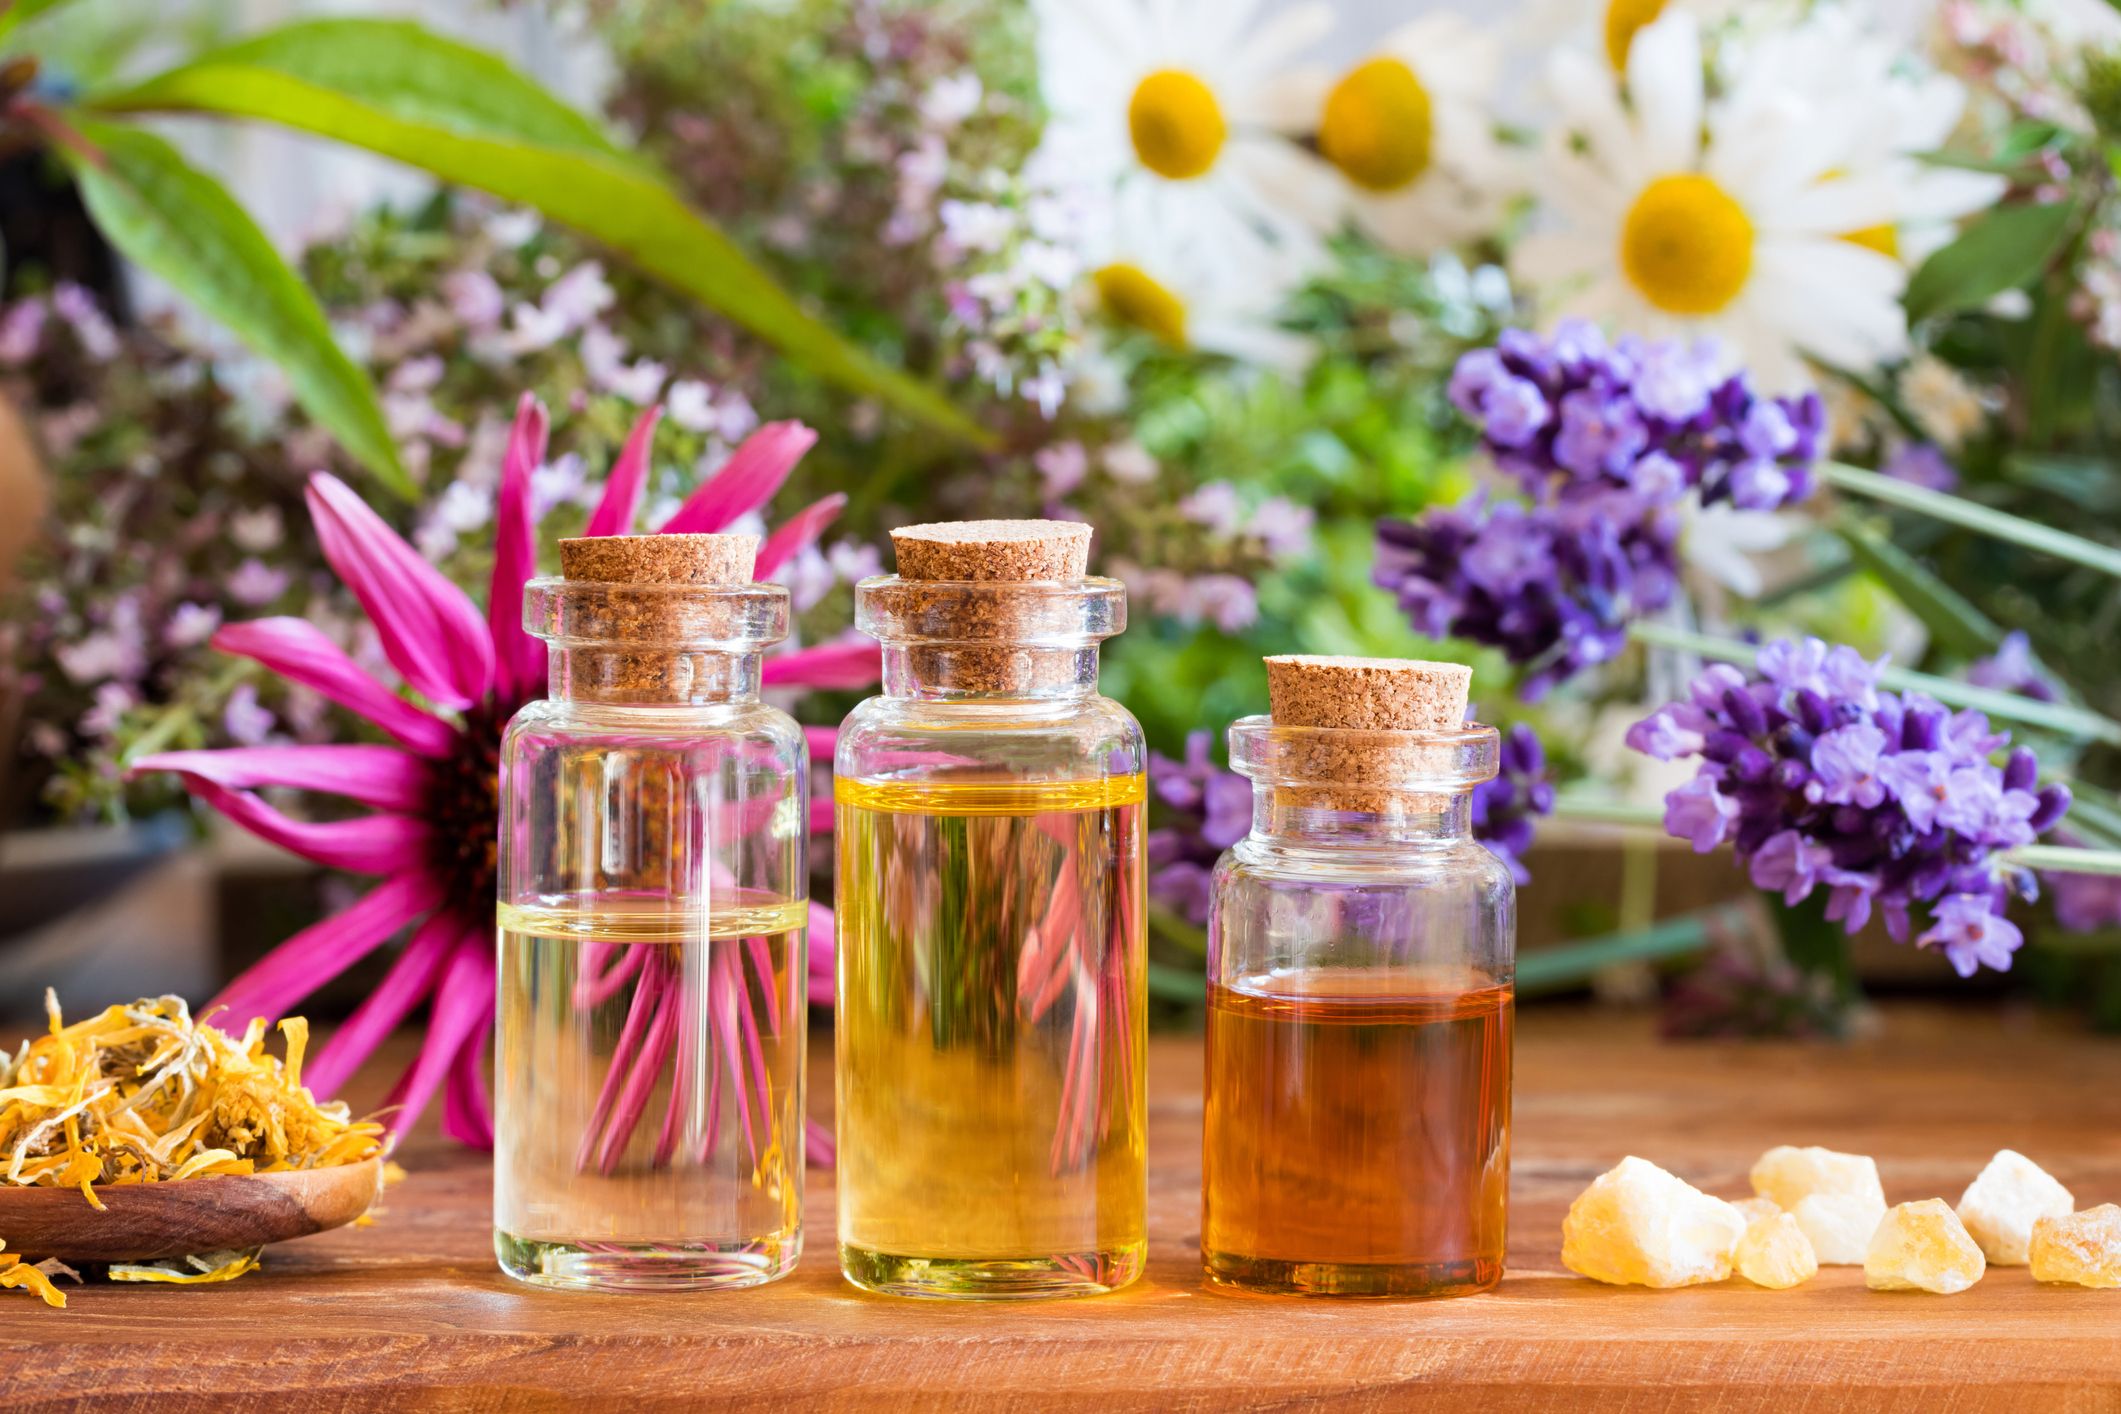 8 Essentials Oils for Headaches and Migraines - How to Use Essential Oils  for Headaches